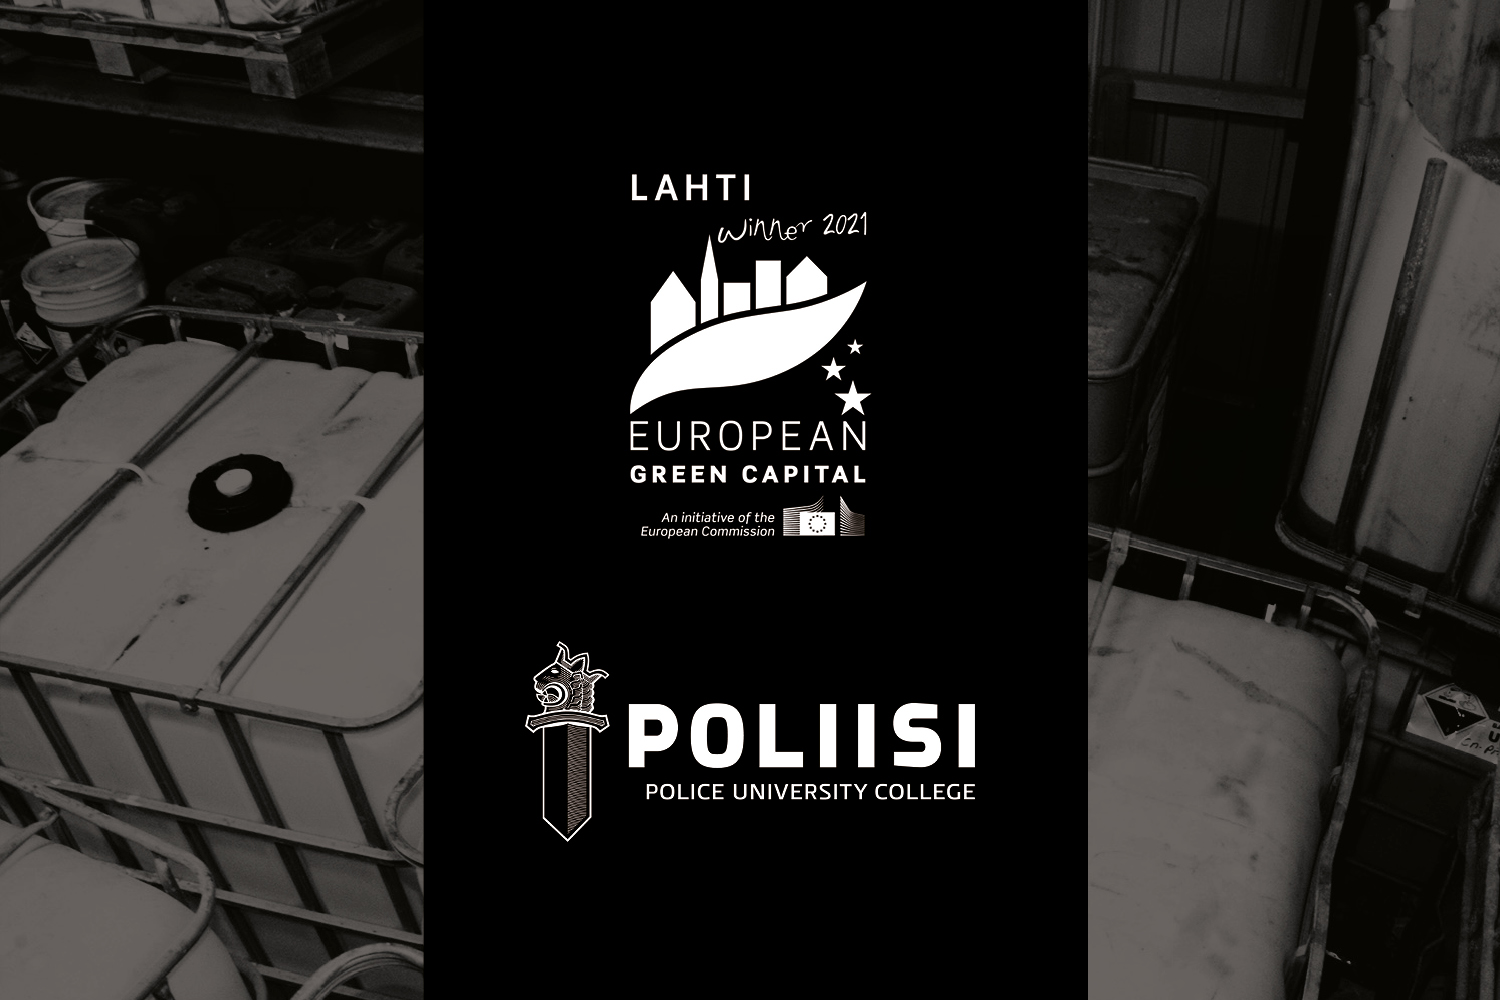 The picture shows large plastic canisters. In the foreground are the logos of Lahti European Green Capital and the Police University College.